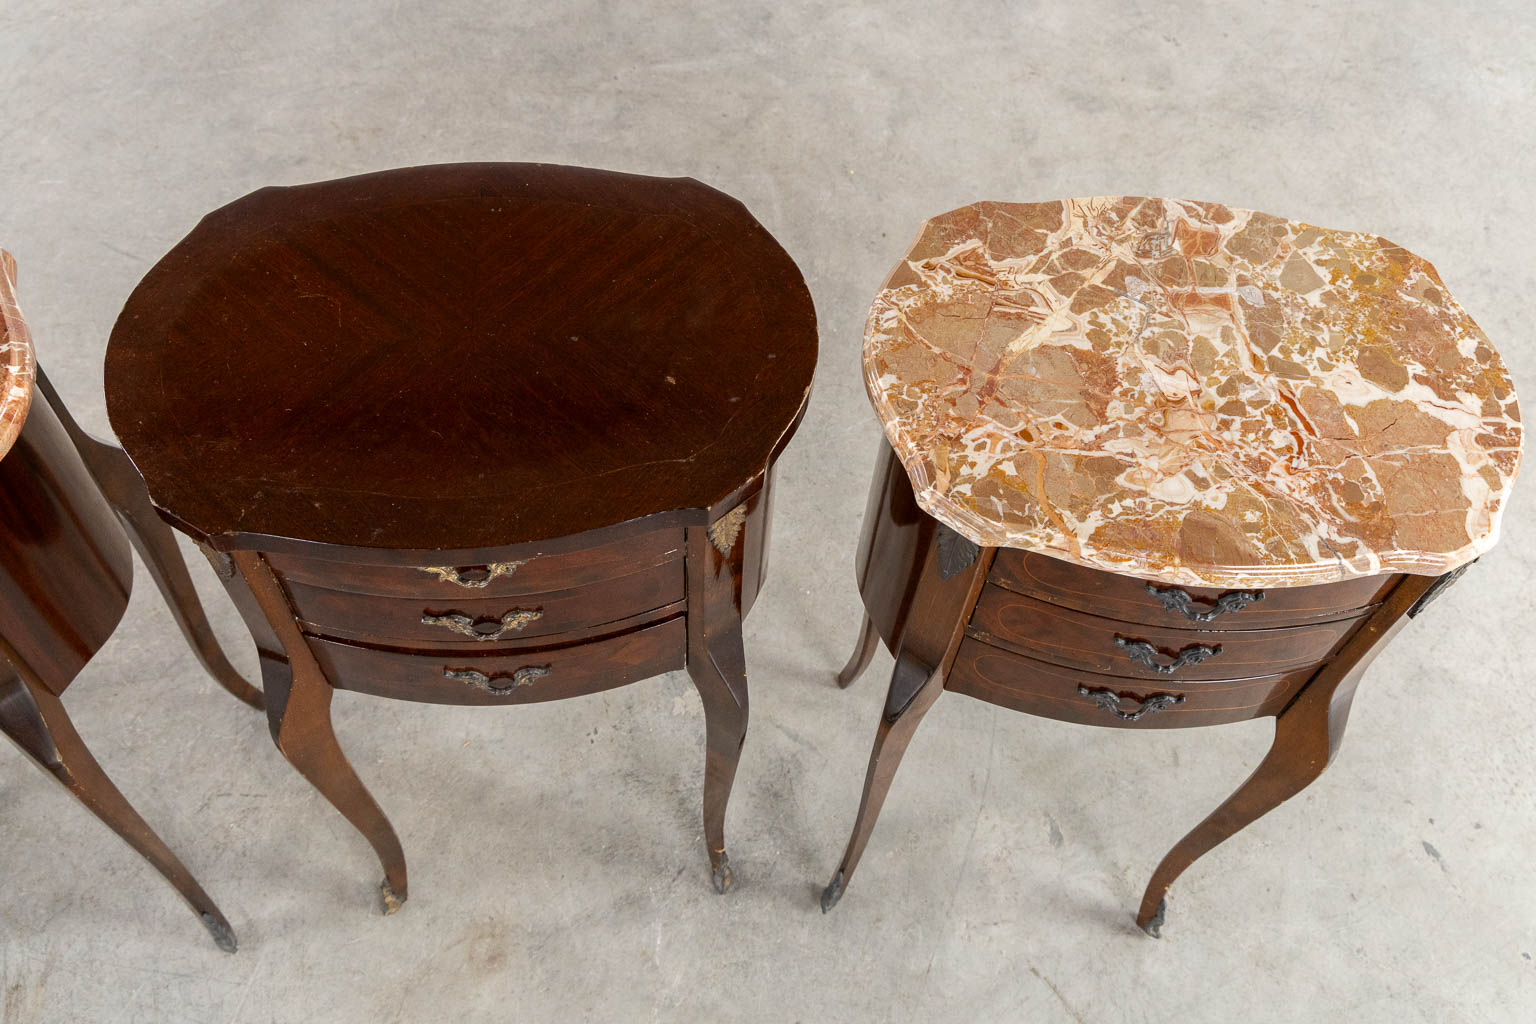 Five side tables or nightstands. (L:27 x W:40 x H:72 cm) - Image 11 of 14